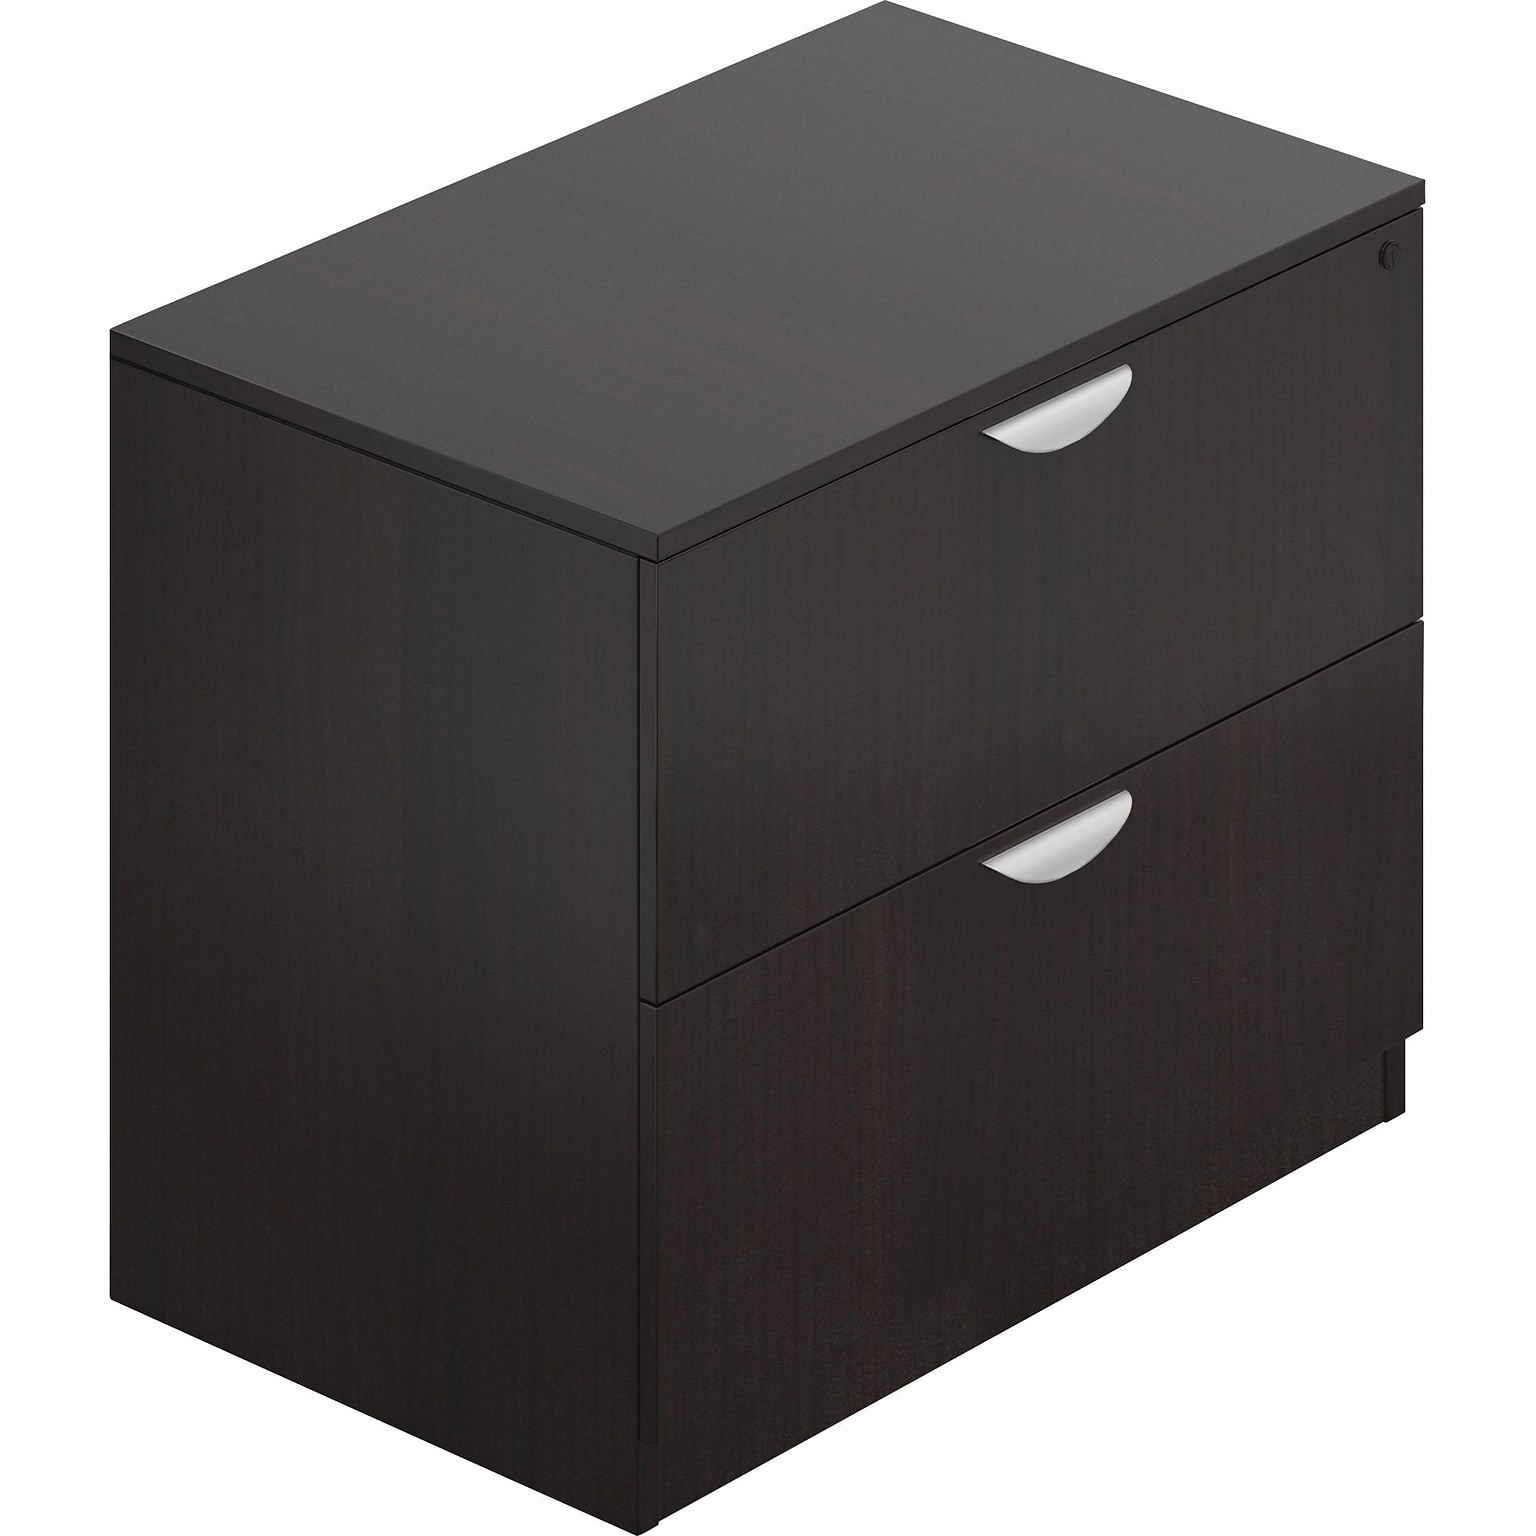 Global Superior 2-Drawer Lateral File Cabinet, Letter/Legal Size, Lockable, 29.5H x 36W x 22D, Espresso (TDSL3622LF-AEL)